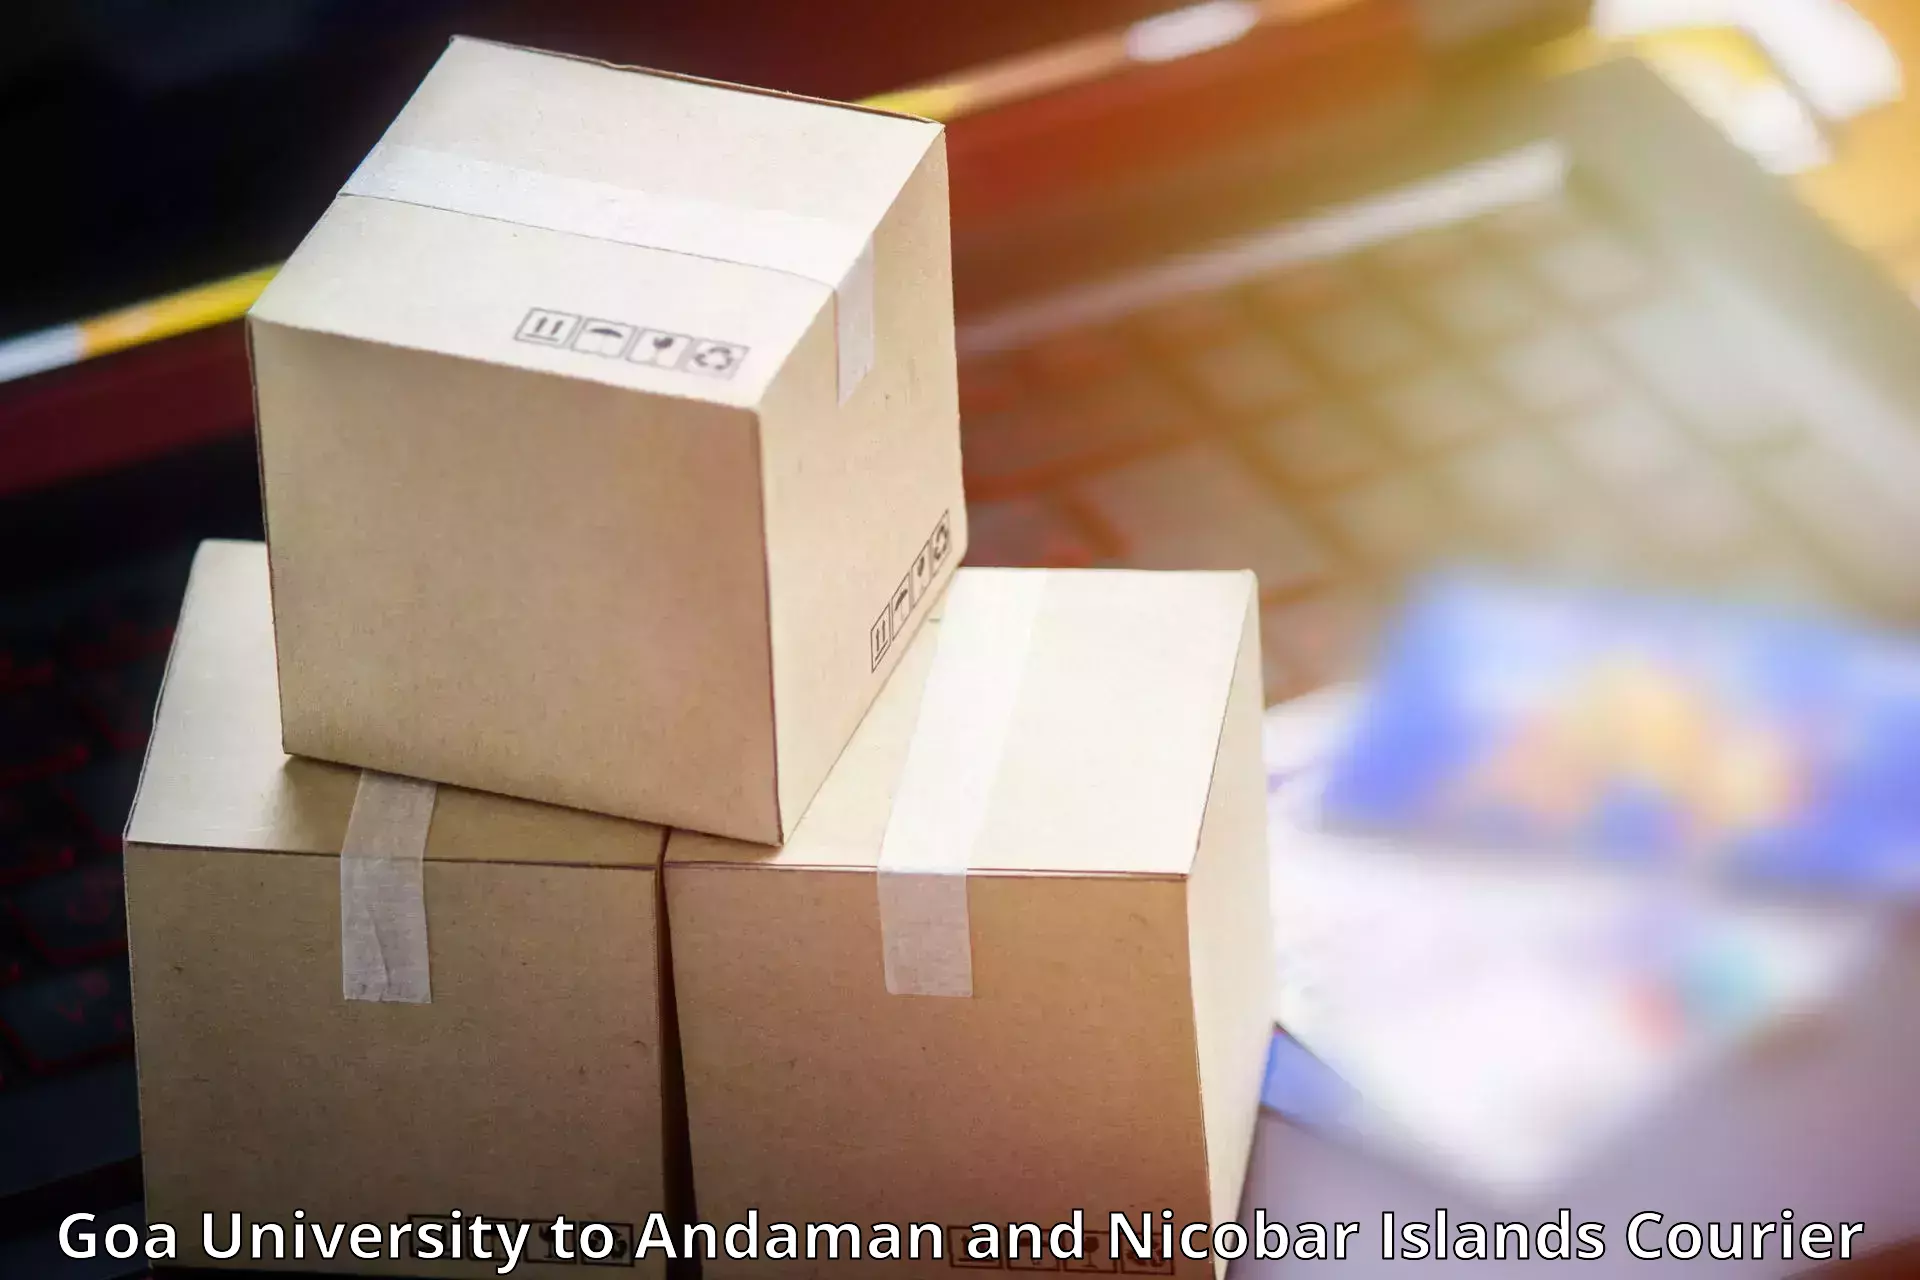 Advanced package delivery in Goa University to Port Blair